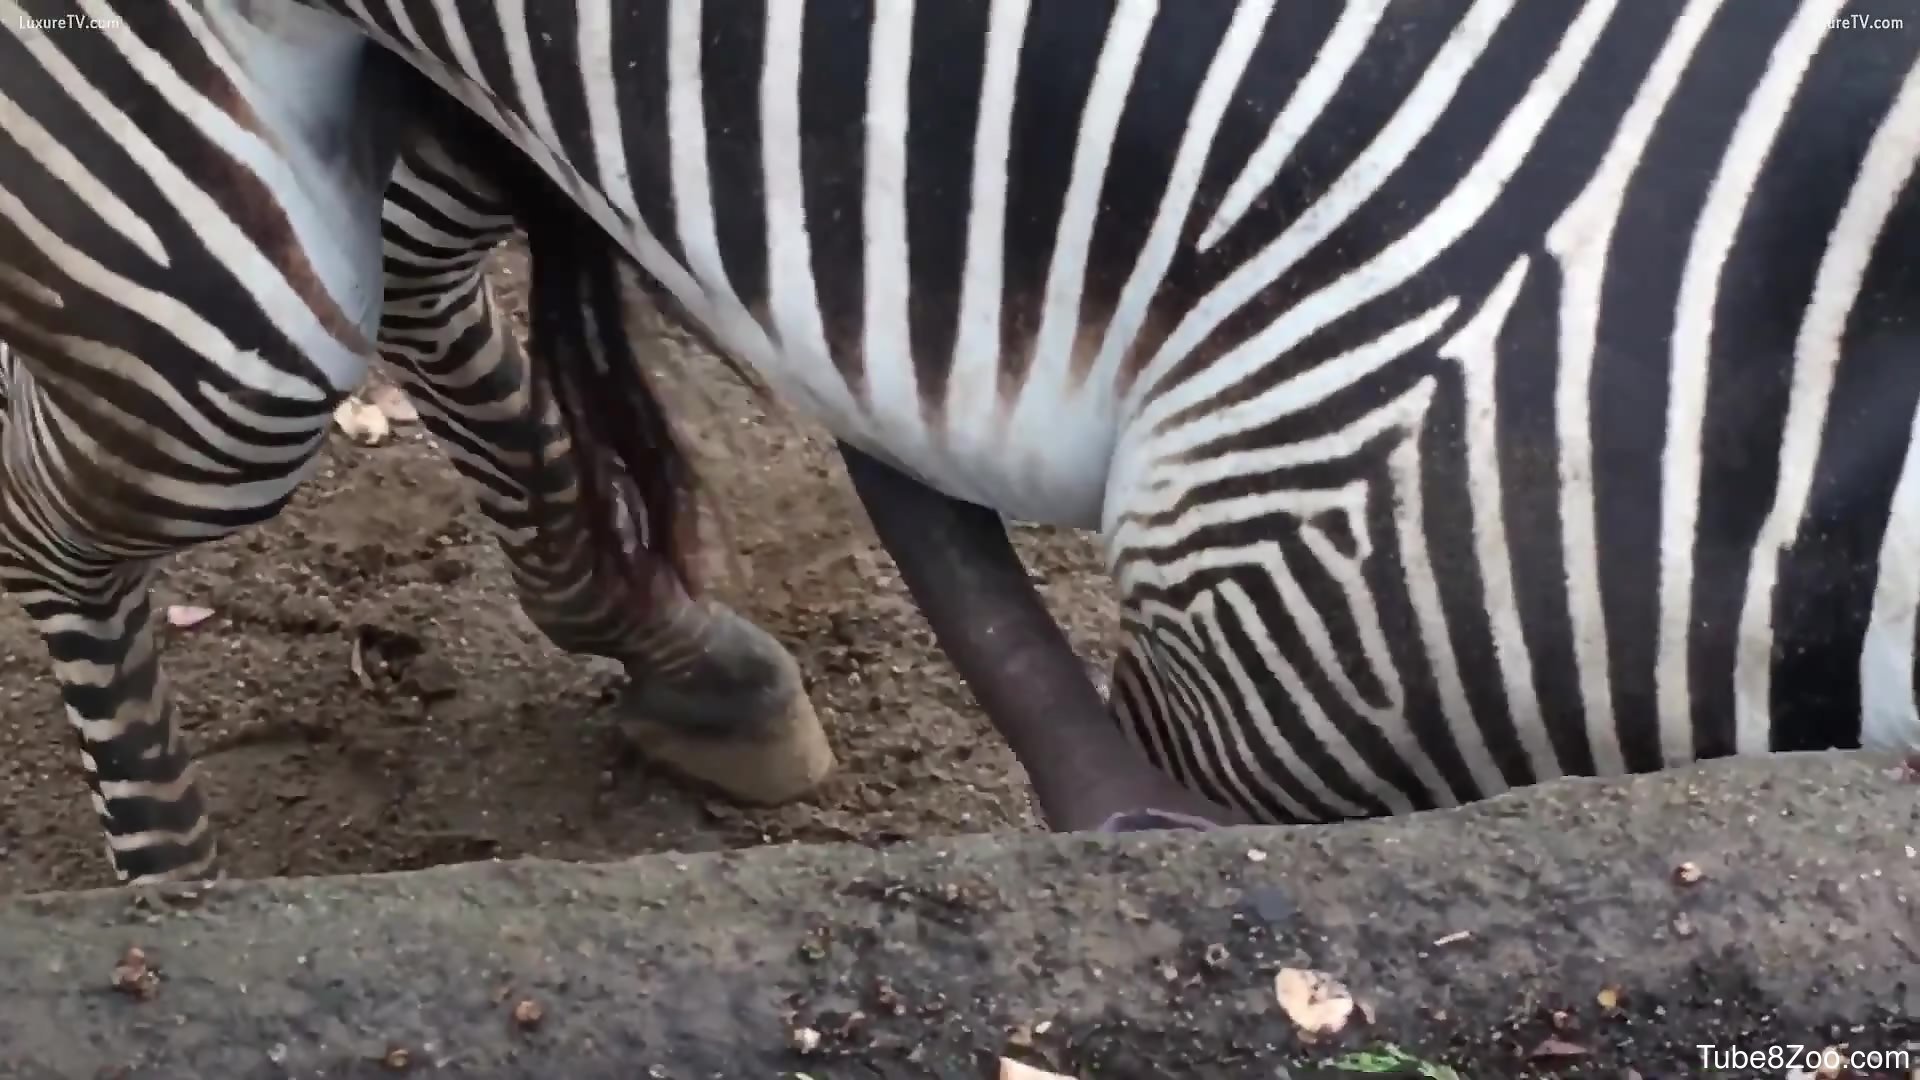 Zebra cock continues to grow in a hot porno here pic pic